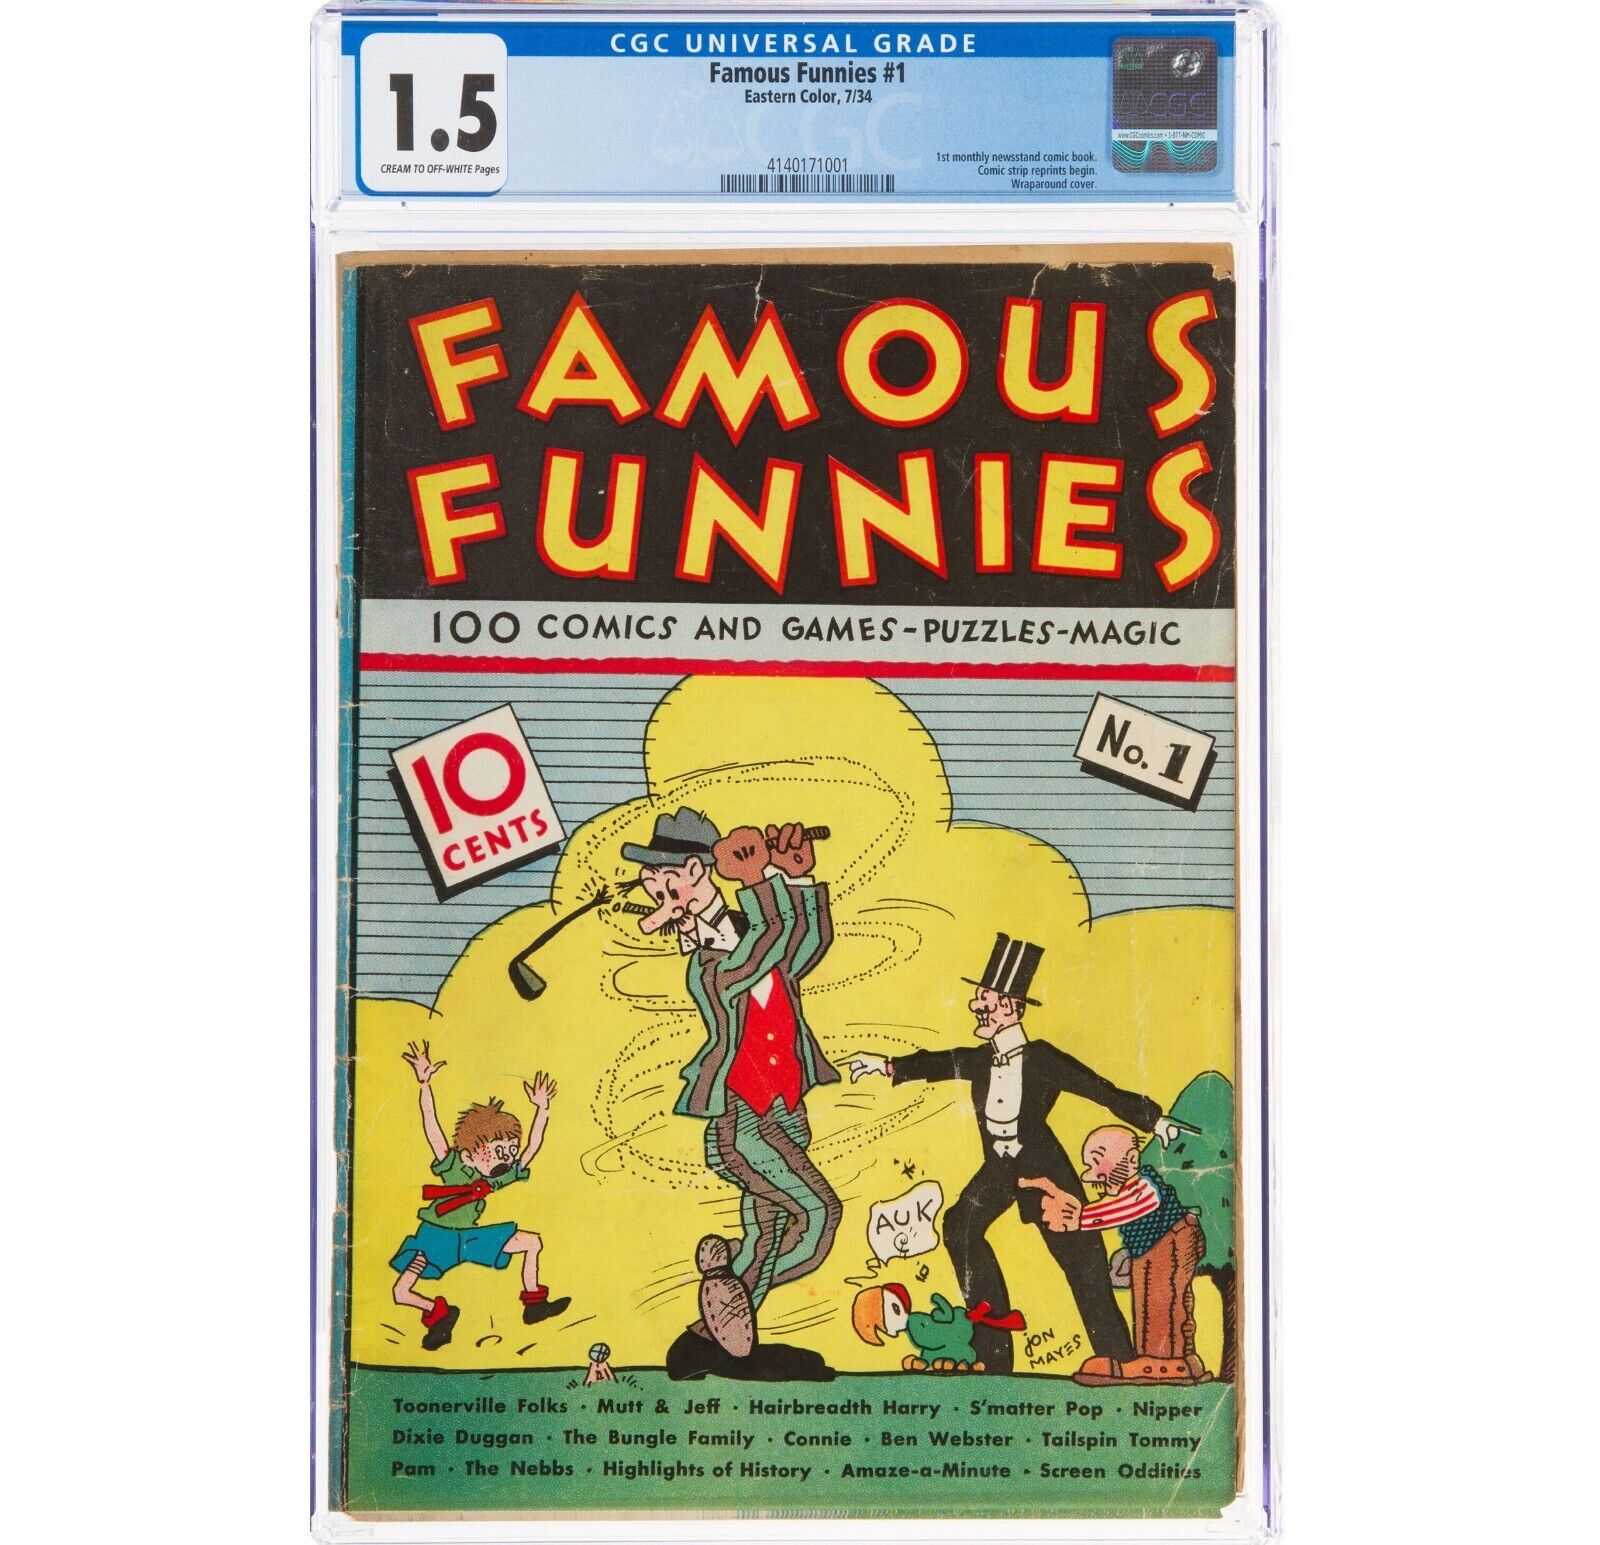 Famous Funnies 1 Eastern Color 1934 CGC FRGD 15 Cream to offwhite pages